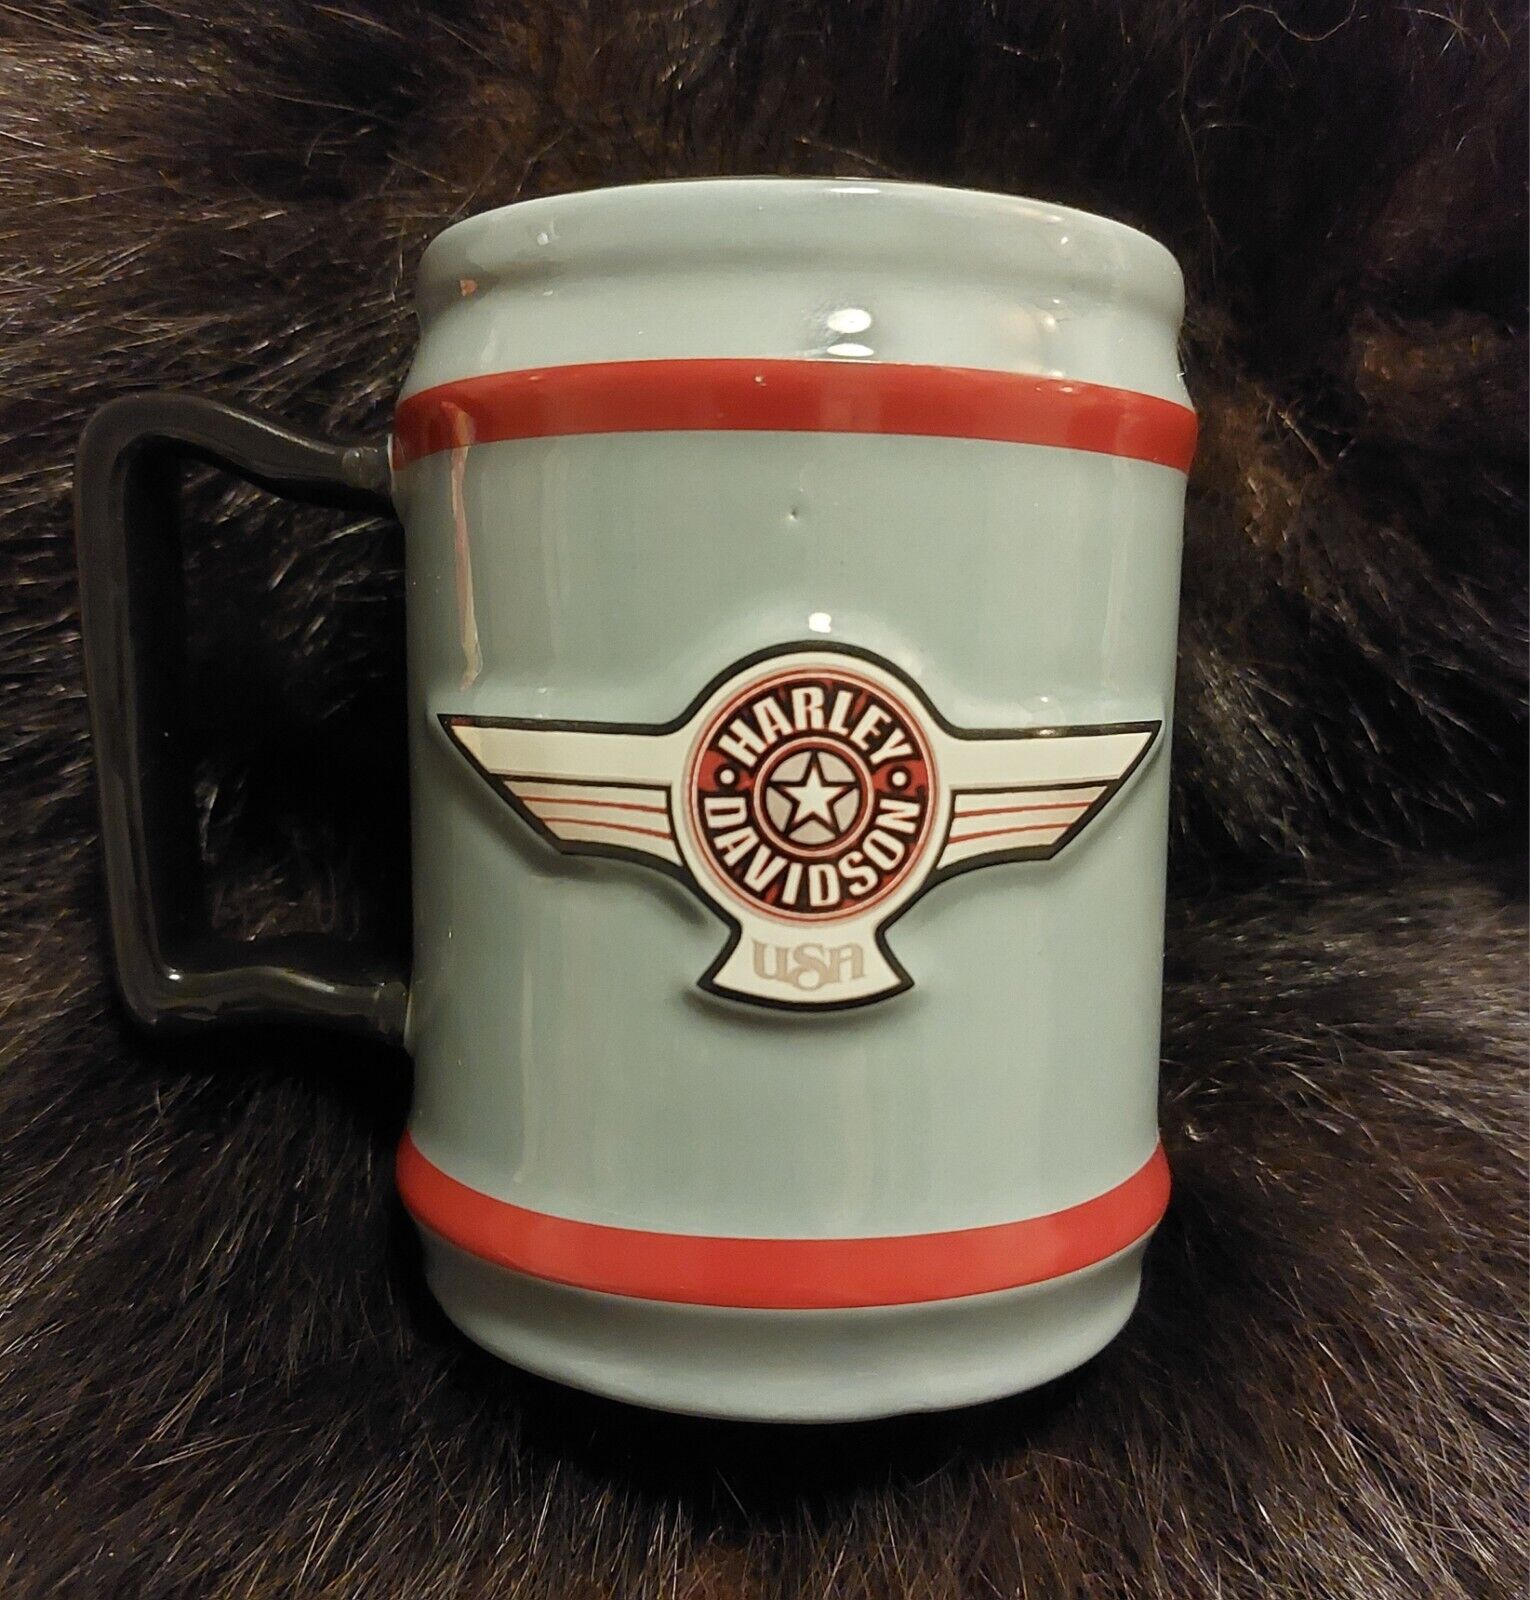 This is the one Rare Harley Davidson Mug Coffee Official Licensed Product Gift